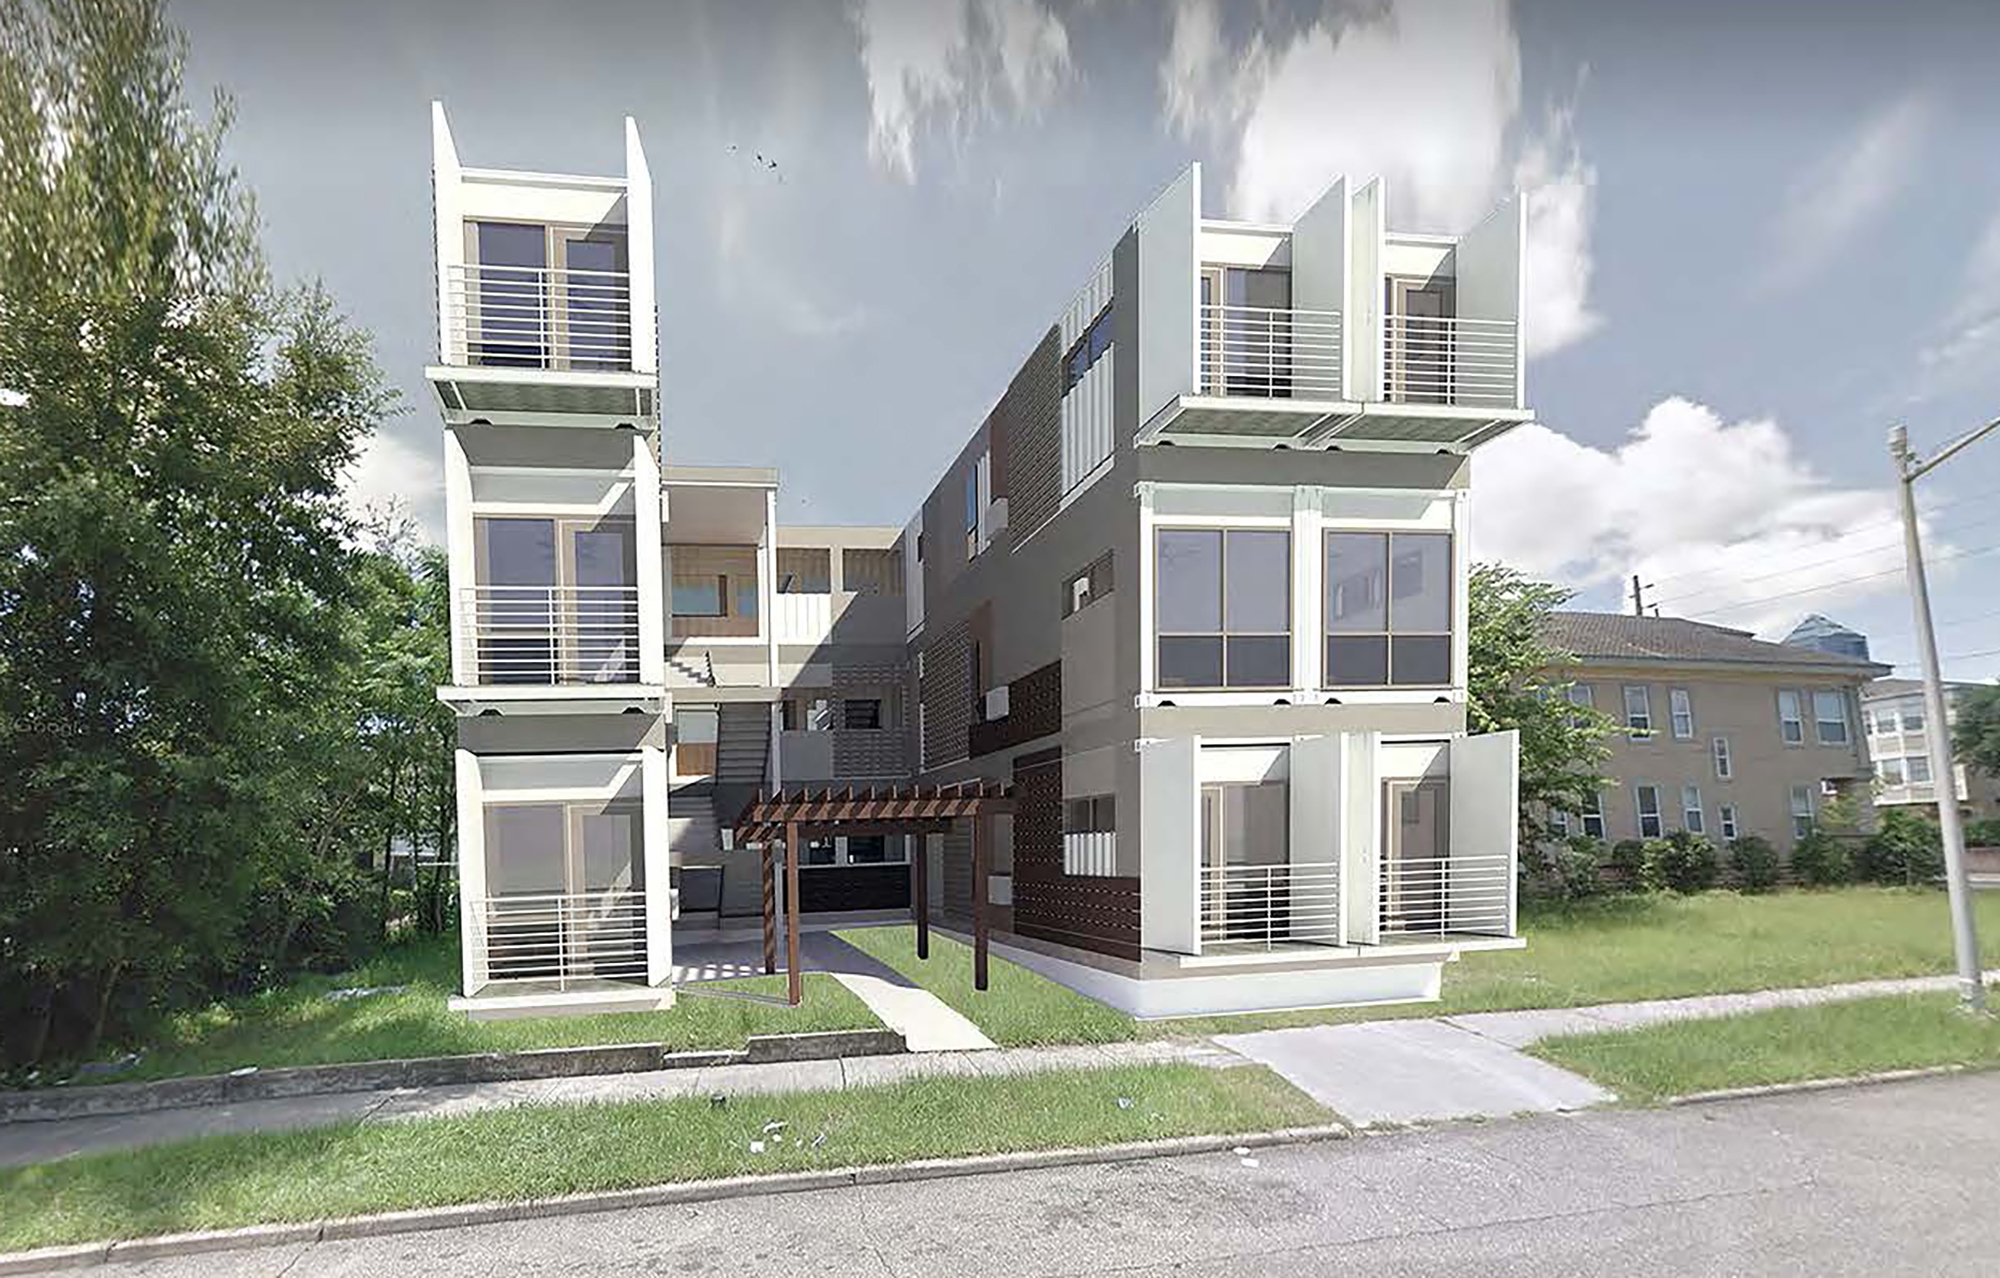 Rendering of Ashley Street Container Lofts, an 18-unit apartment complex made up of shipping containers.